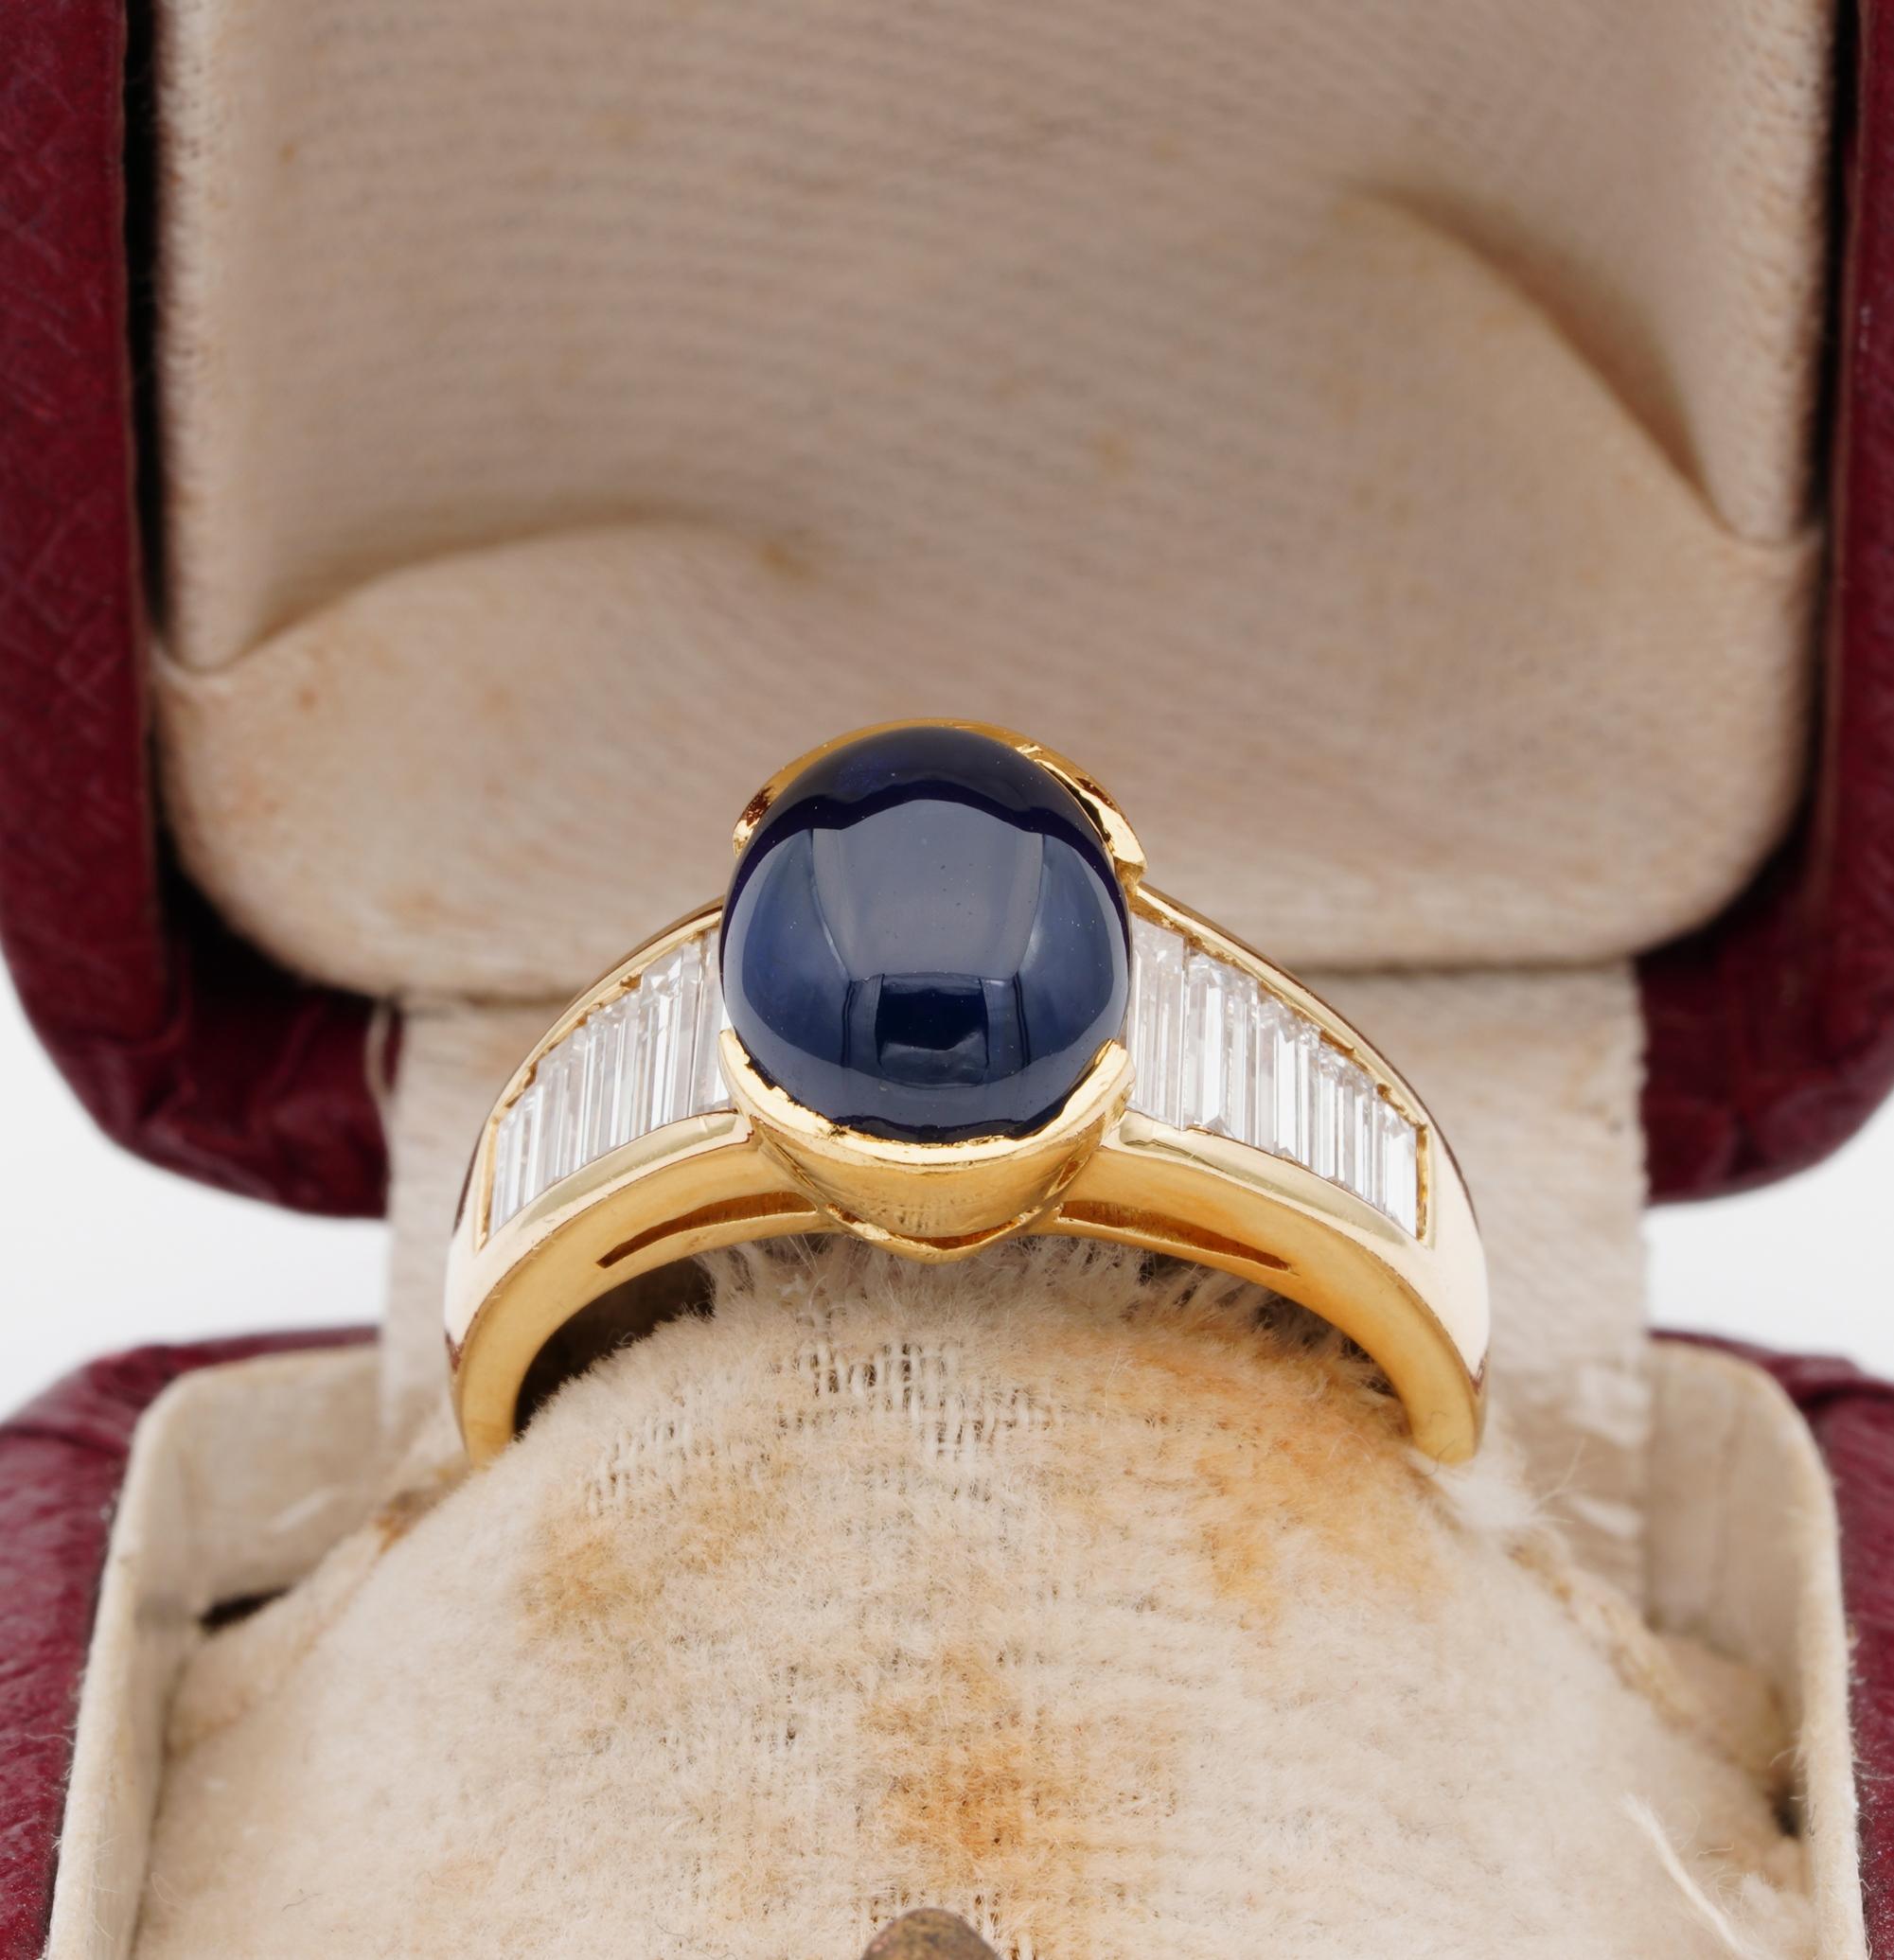 Sleek design and Quality

An exquisite Mid Century fashionable ring finely hand crafted as individual piece of jewellery, great quality
18 KT solid gold made, Italian Origin
Sleek yet elegant in design could be a fantastic engagement ring
Aged 1970